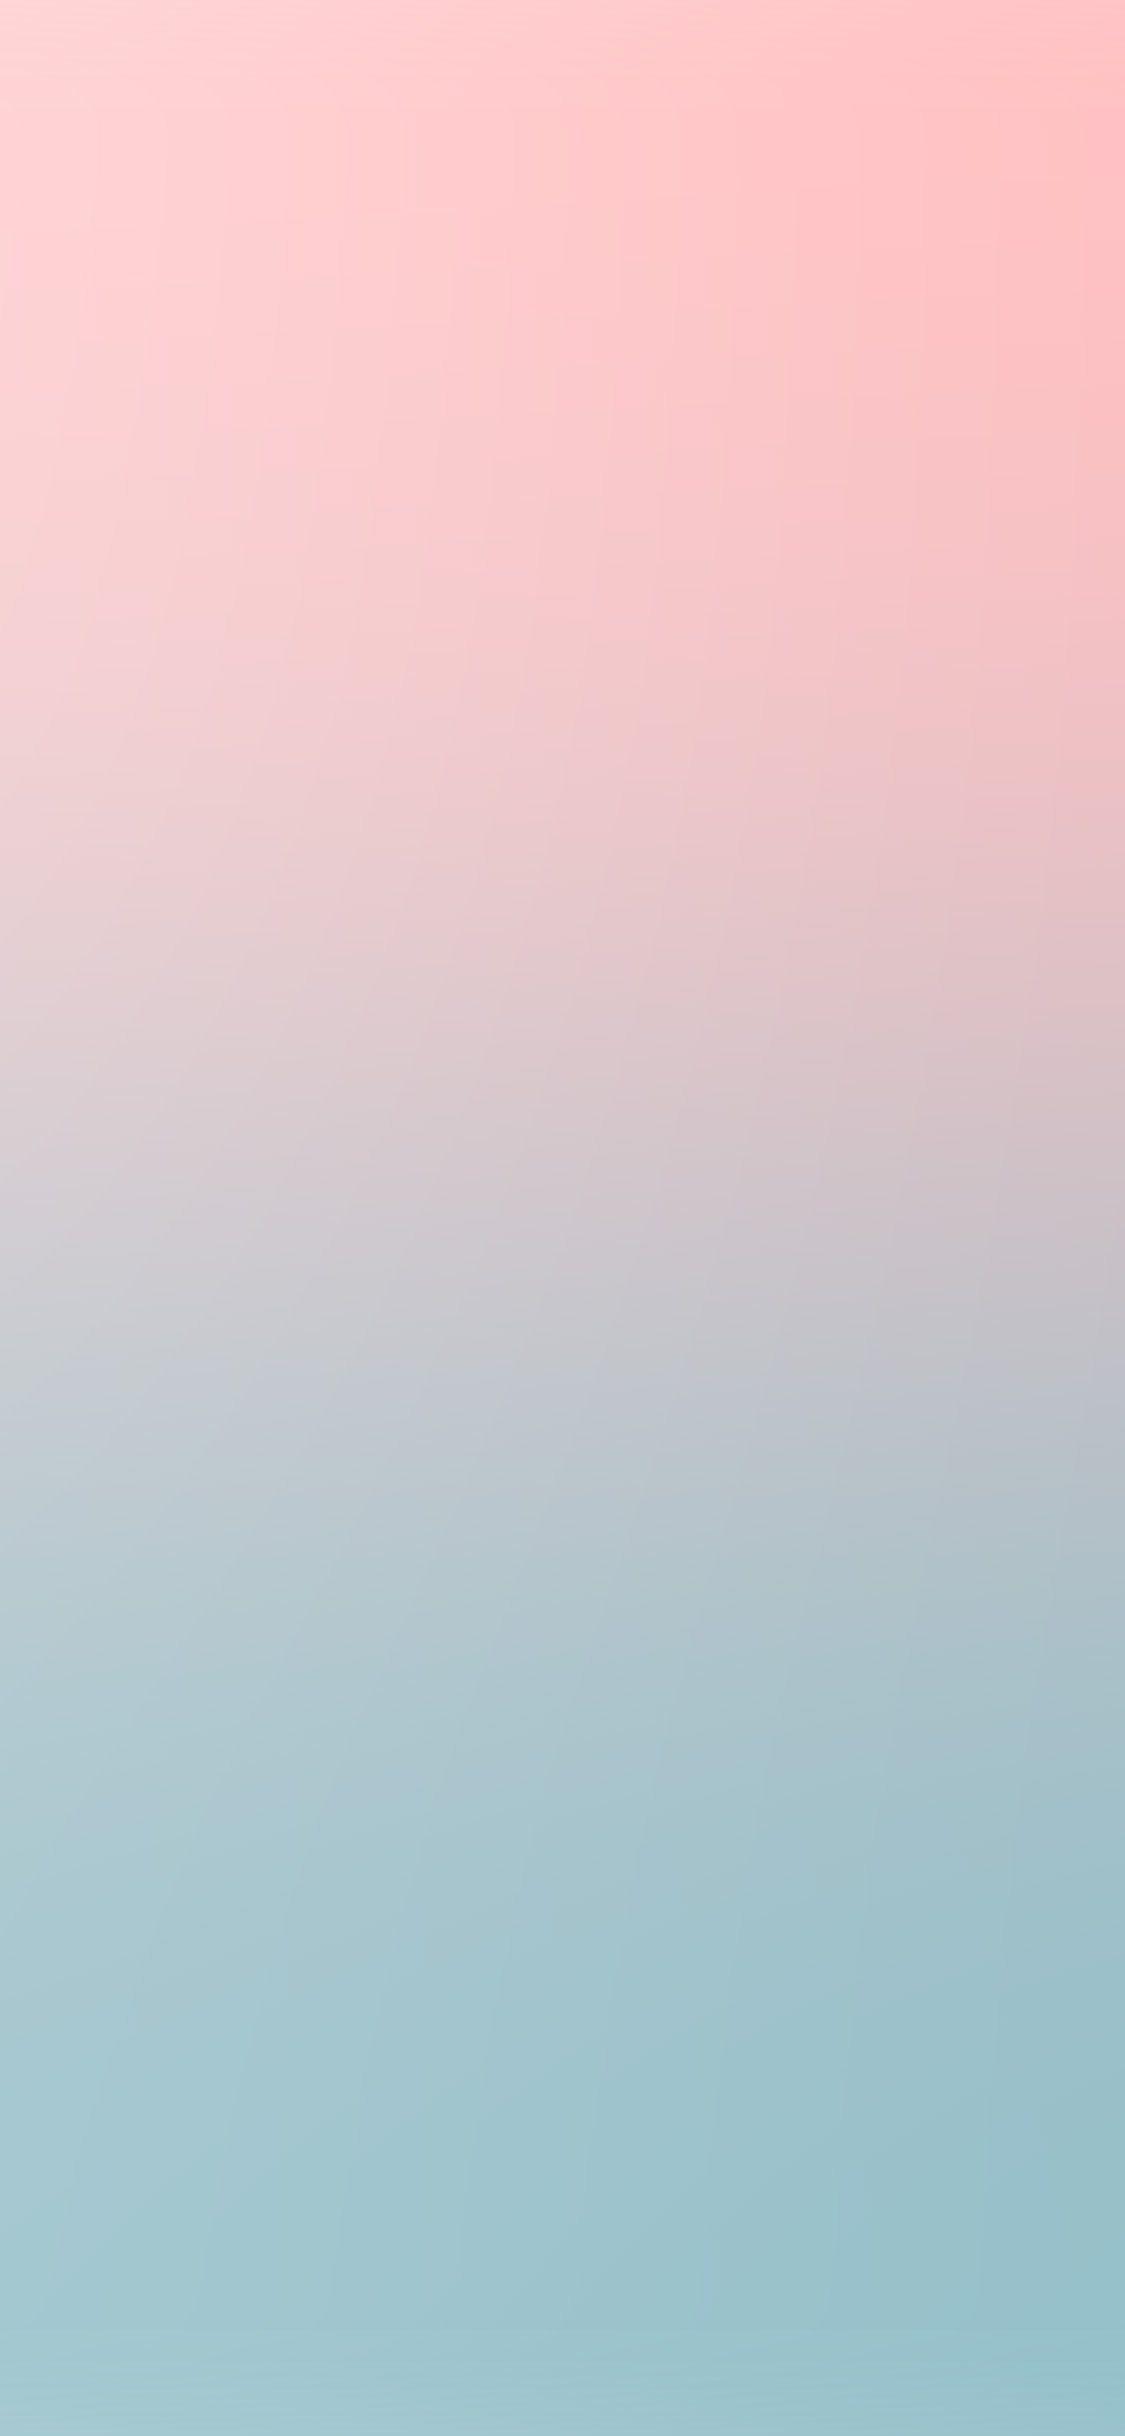 IPhonexpapers.com Apple IPhone Wallpaper Sm07 Pink Blue Soft Pastel Blur Gradation. Pastel Background Wallpaper, Abstract Photographs, Ombre Wallpaper Iphone